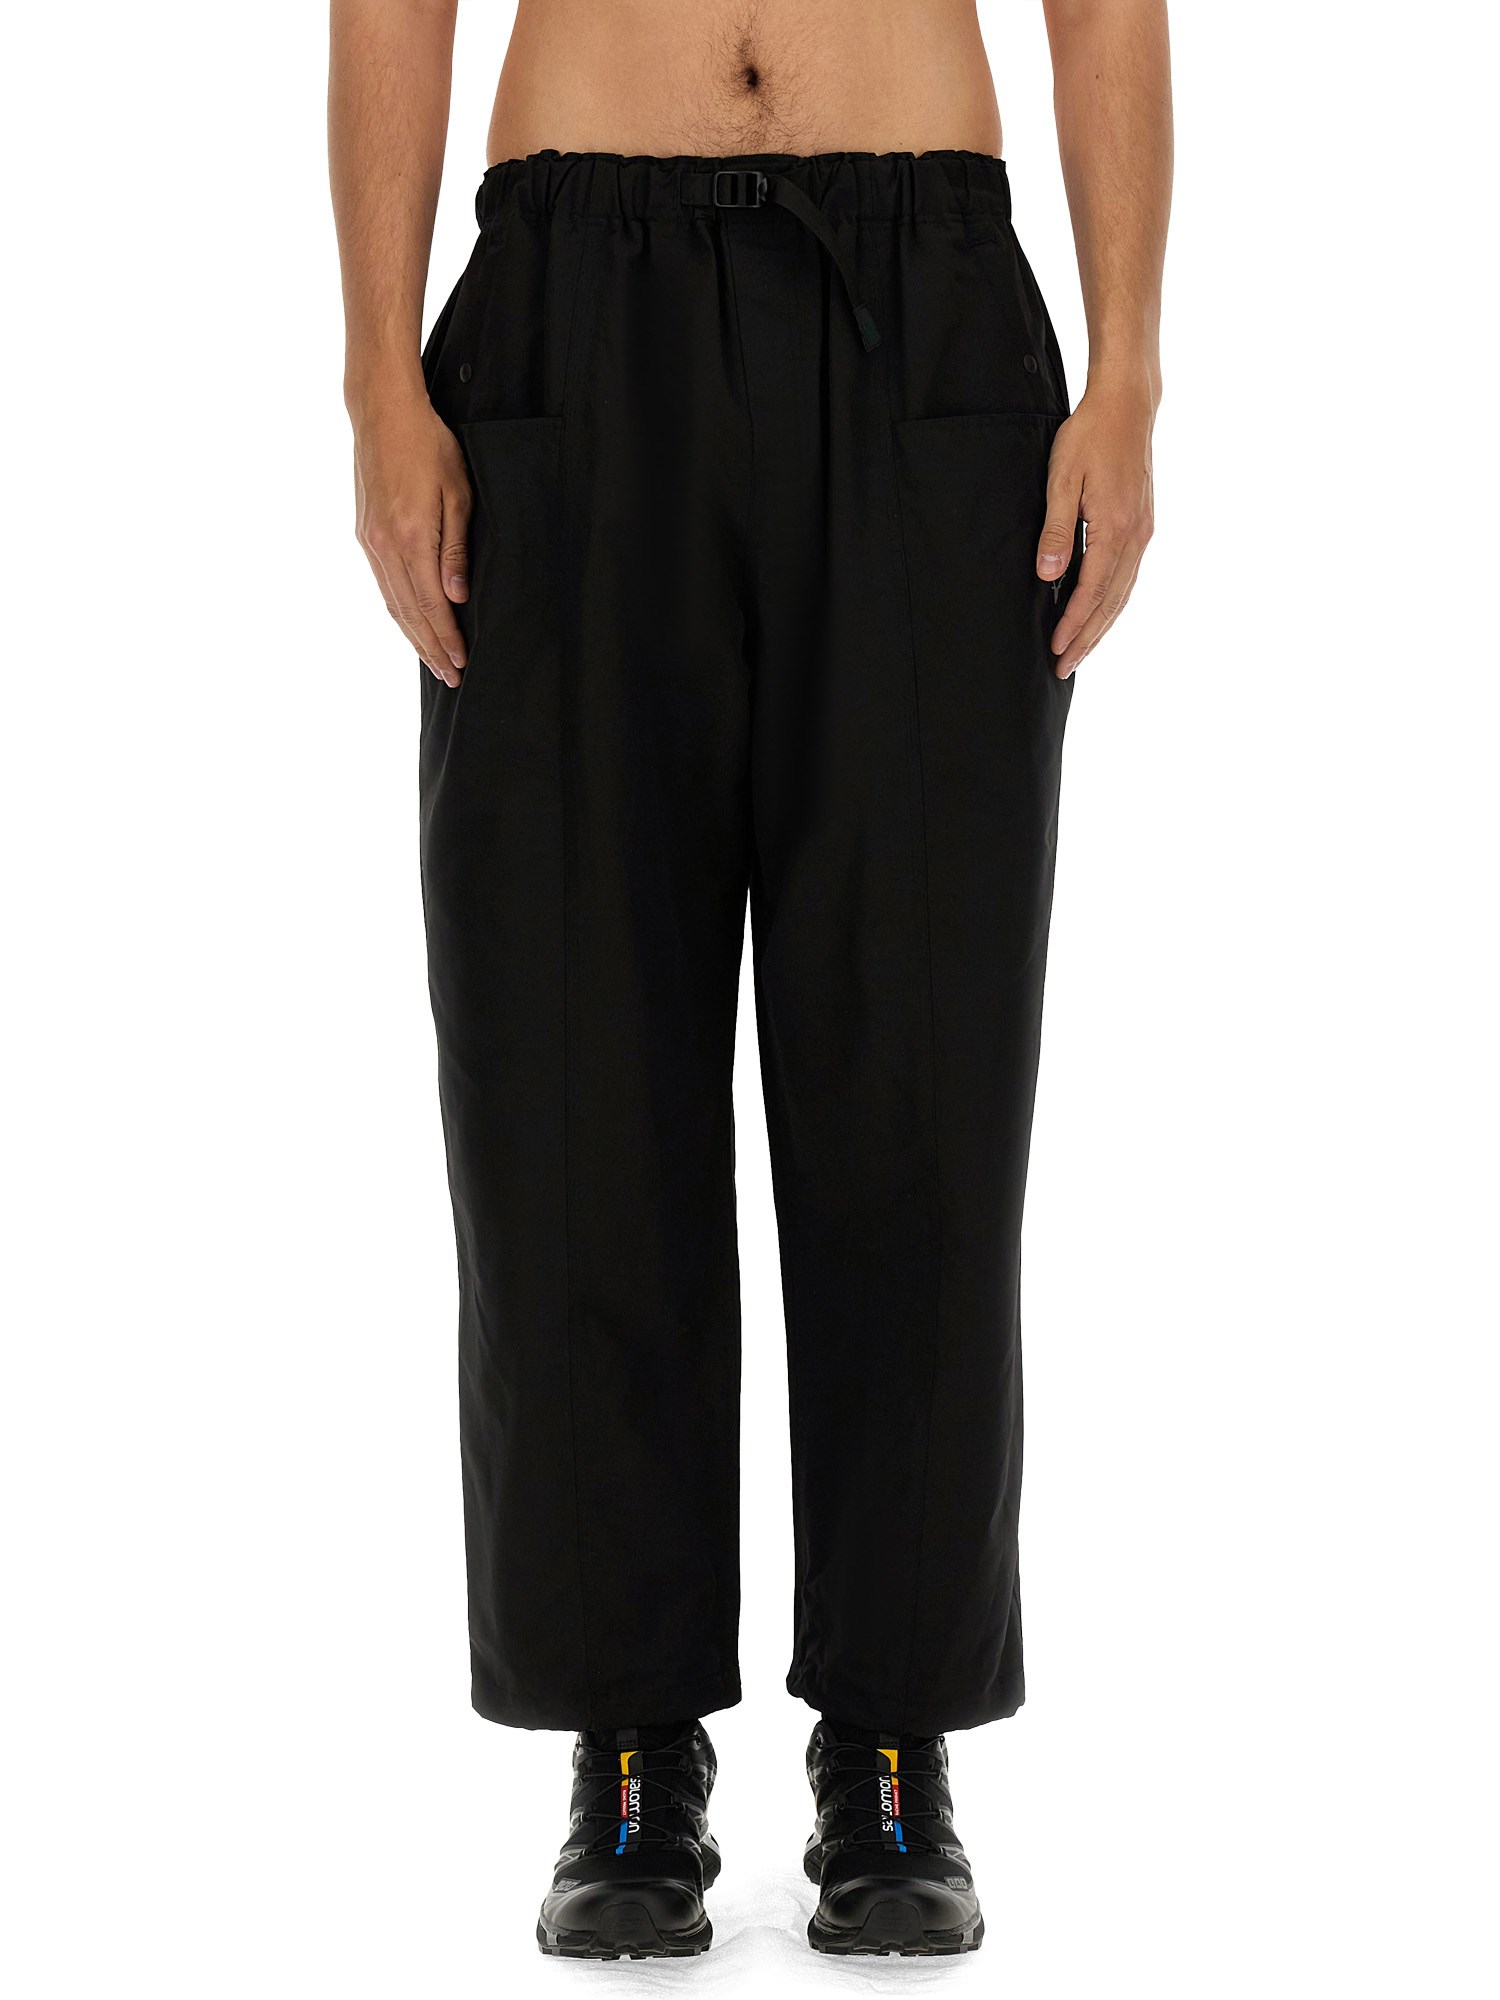 Shop South2 West8 Belted Pants In Black